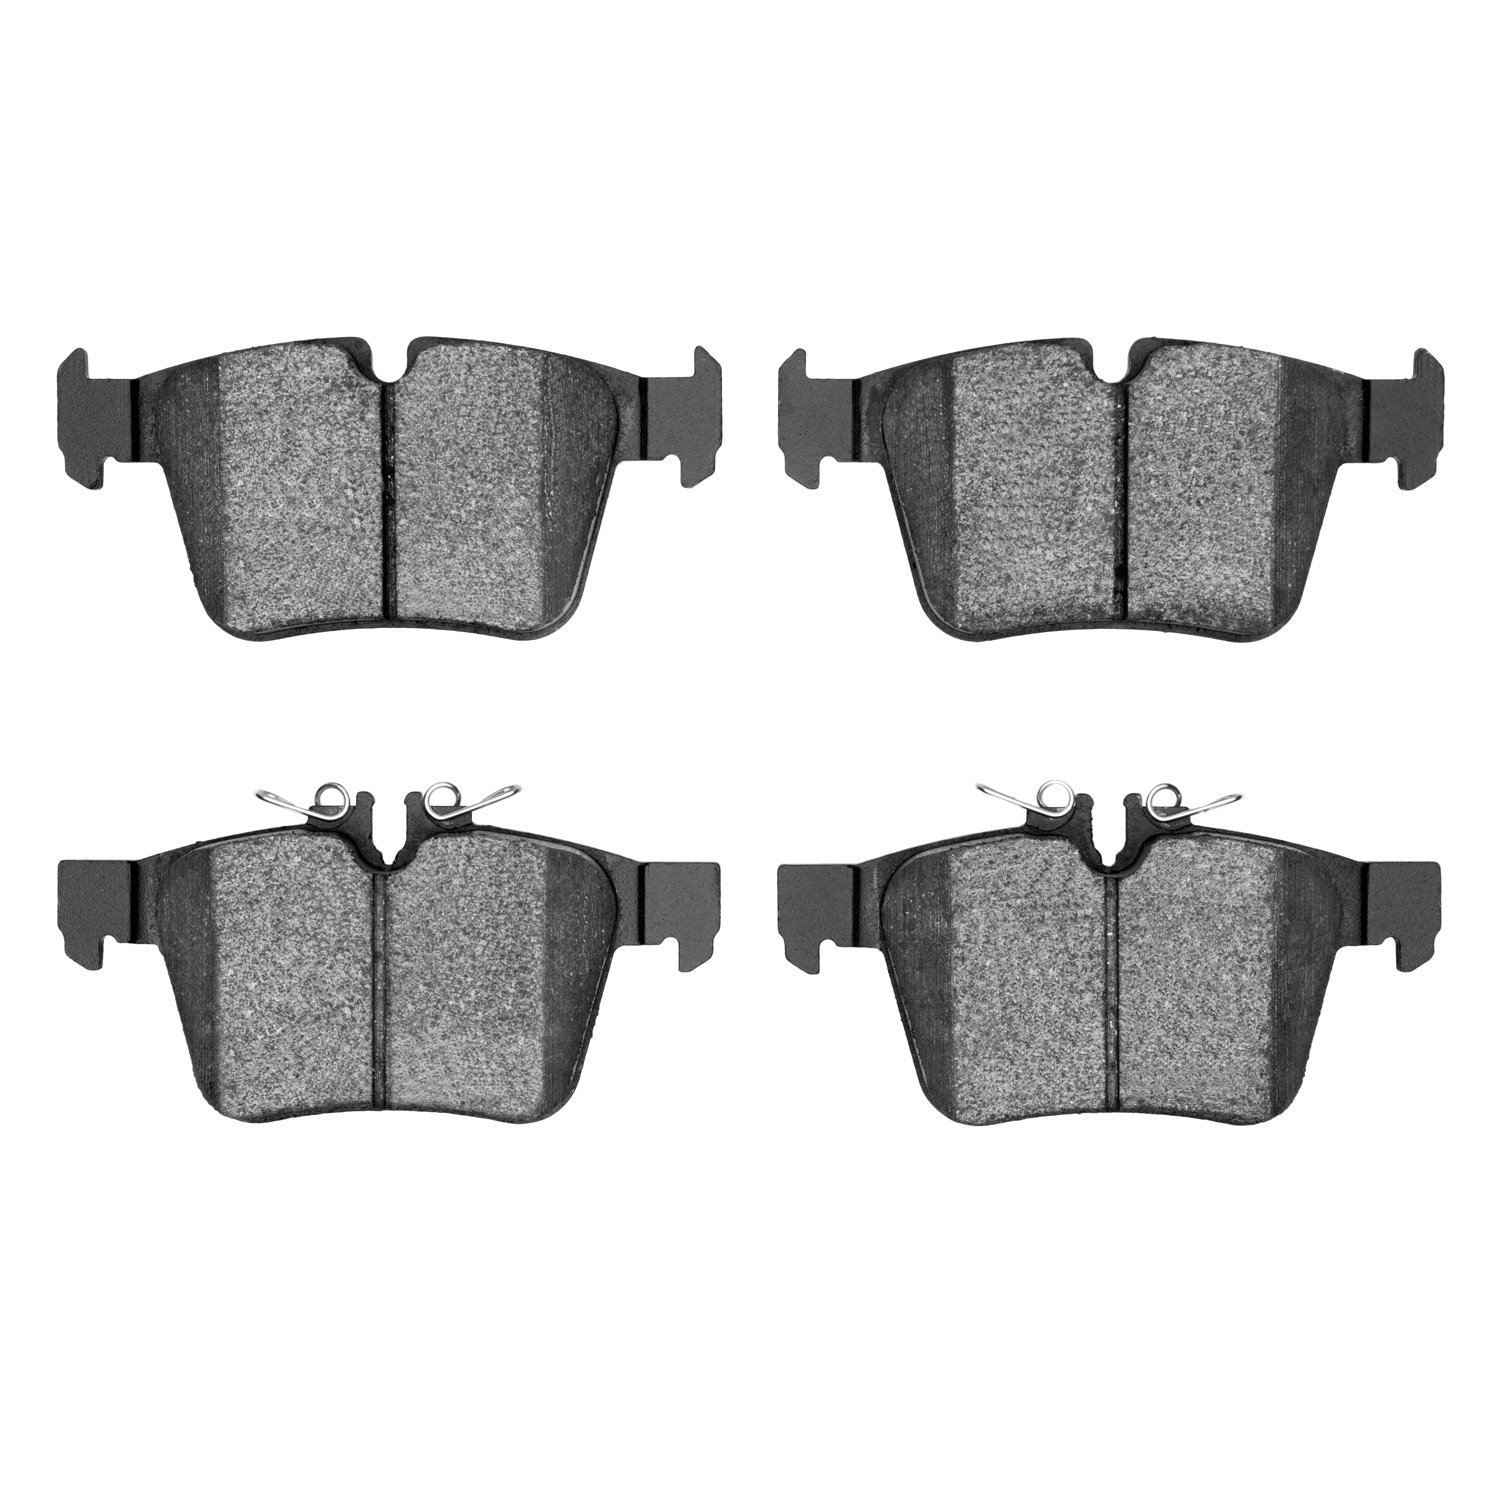 1310-1795-00 3000-Series Ceramic Brake Pads, Fits Select Mercedes-Benz, Position: Rear